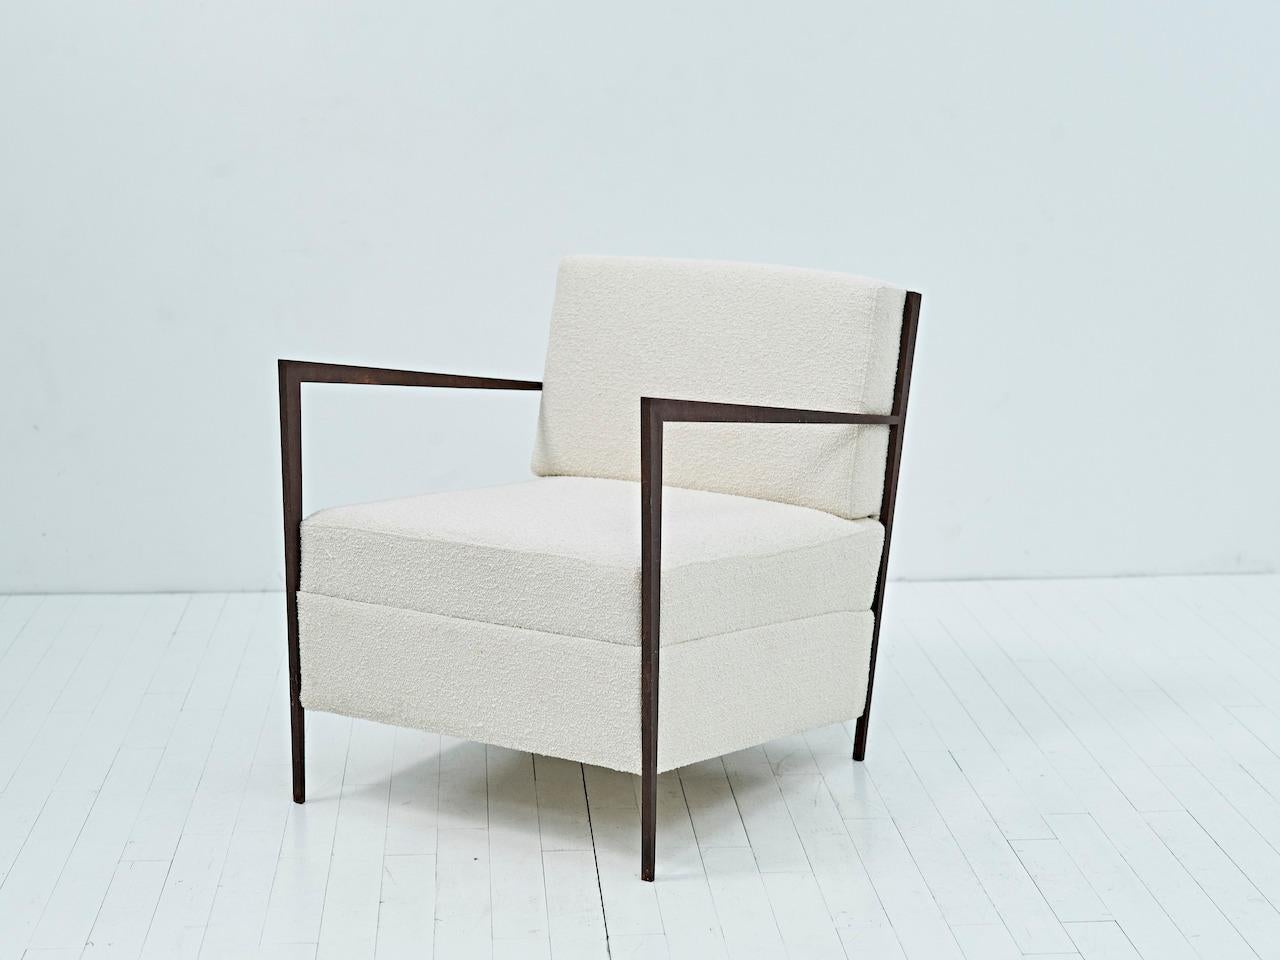 Origine armchair, Off-White Tweed Fabric and Corten Steel Arms, made in France, Limited Edition, Designed by Benjamin Poulanges, French artist represented by Galerie Negropontes in Paris, France.

Multi-faceted artist Benjamin Poulanges offers a